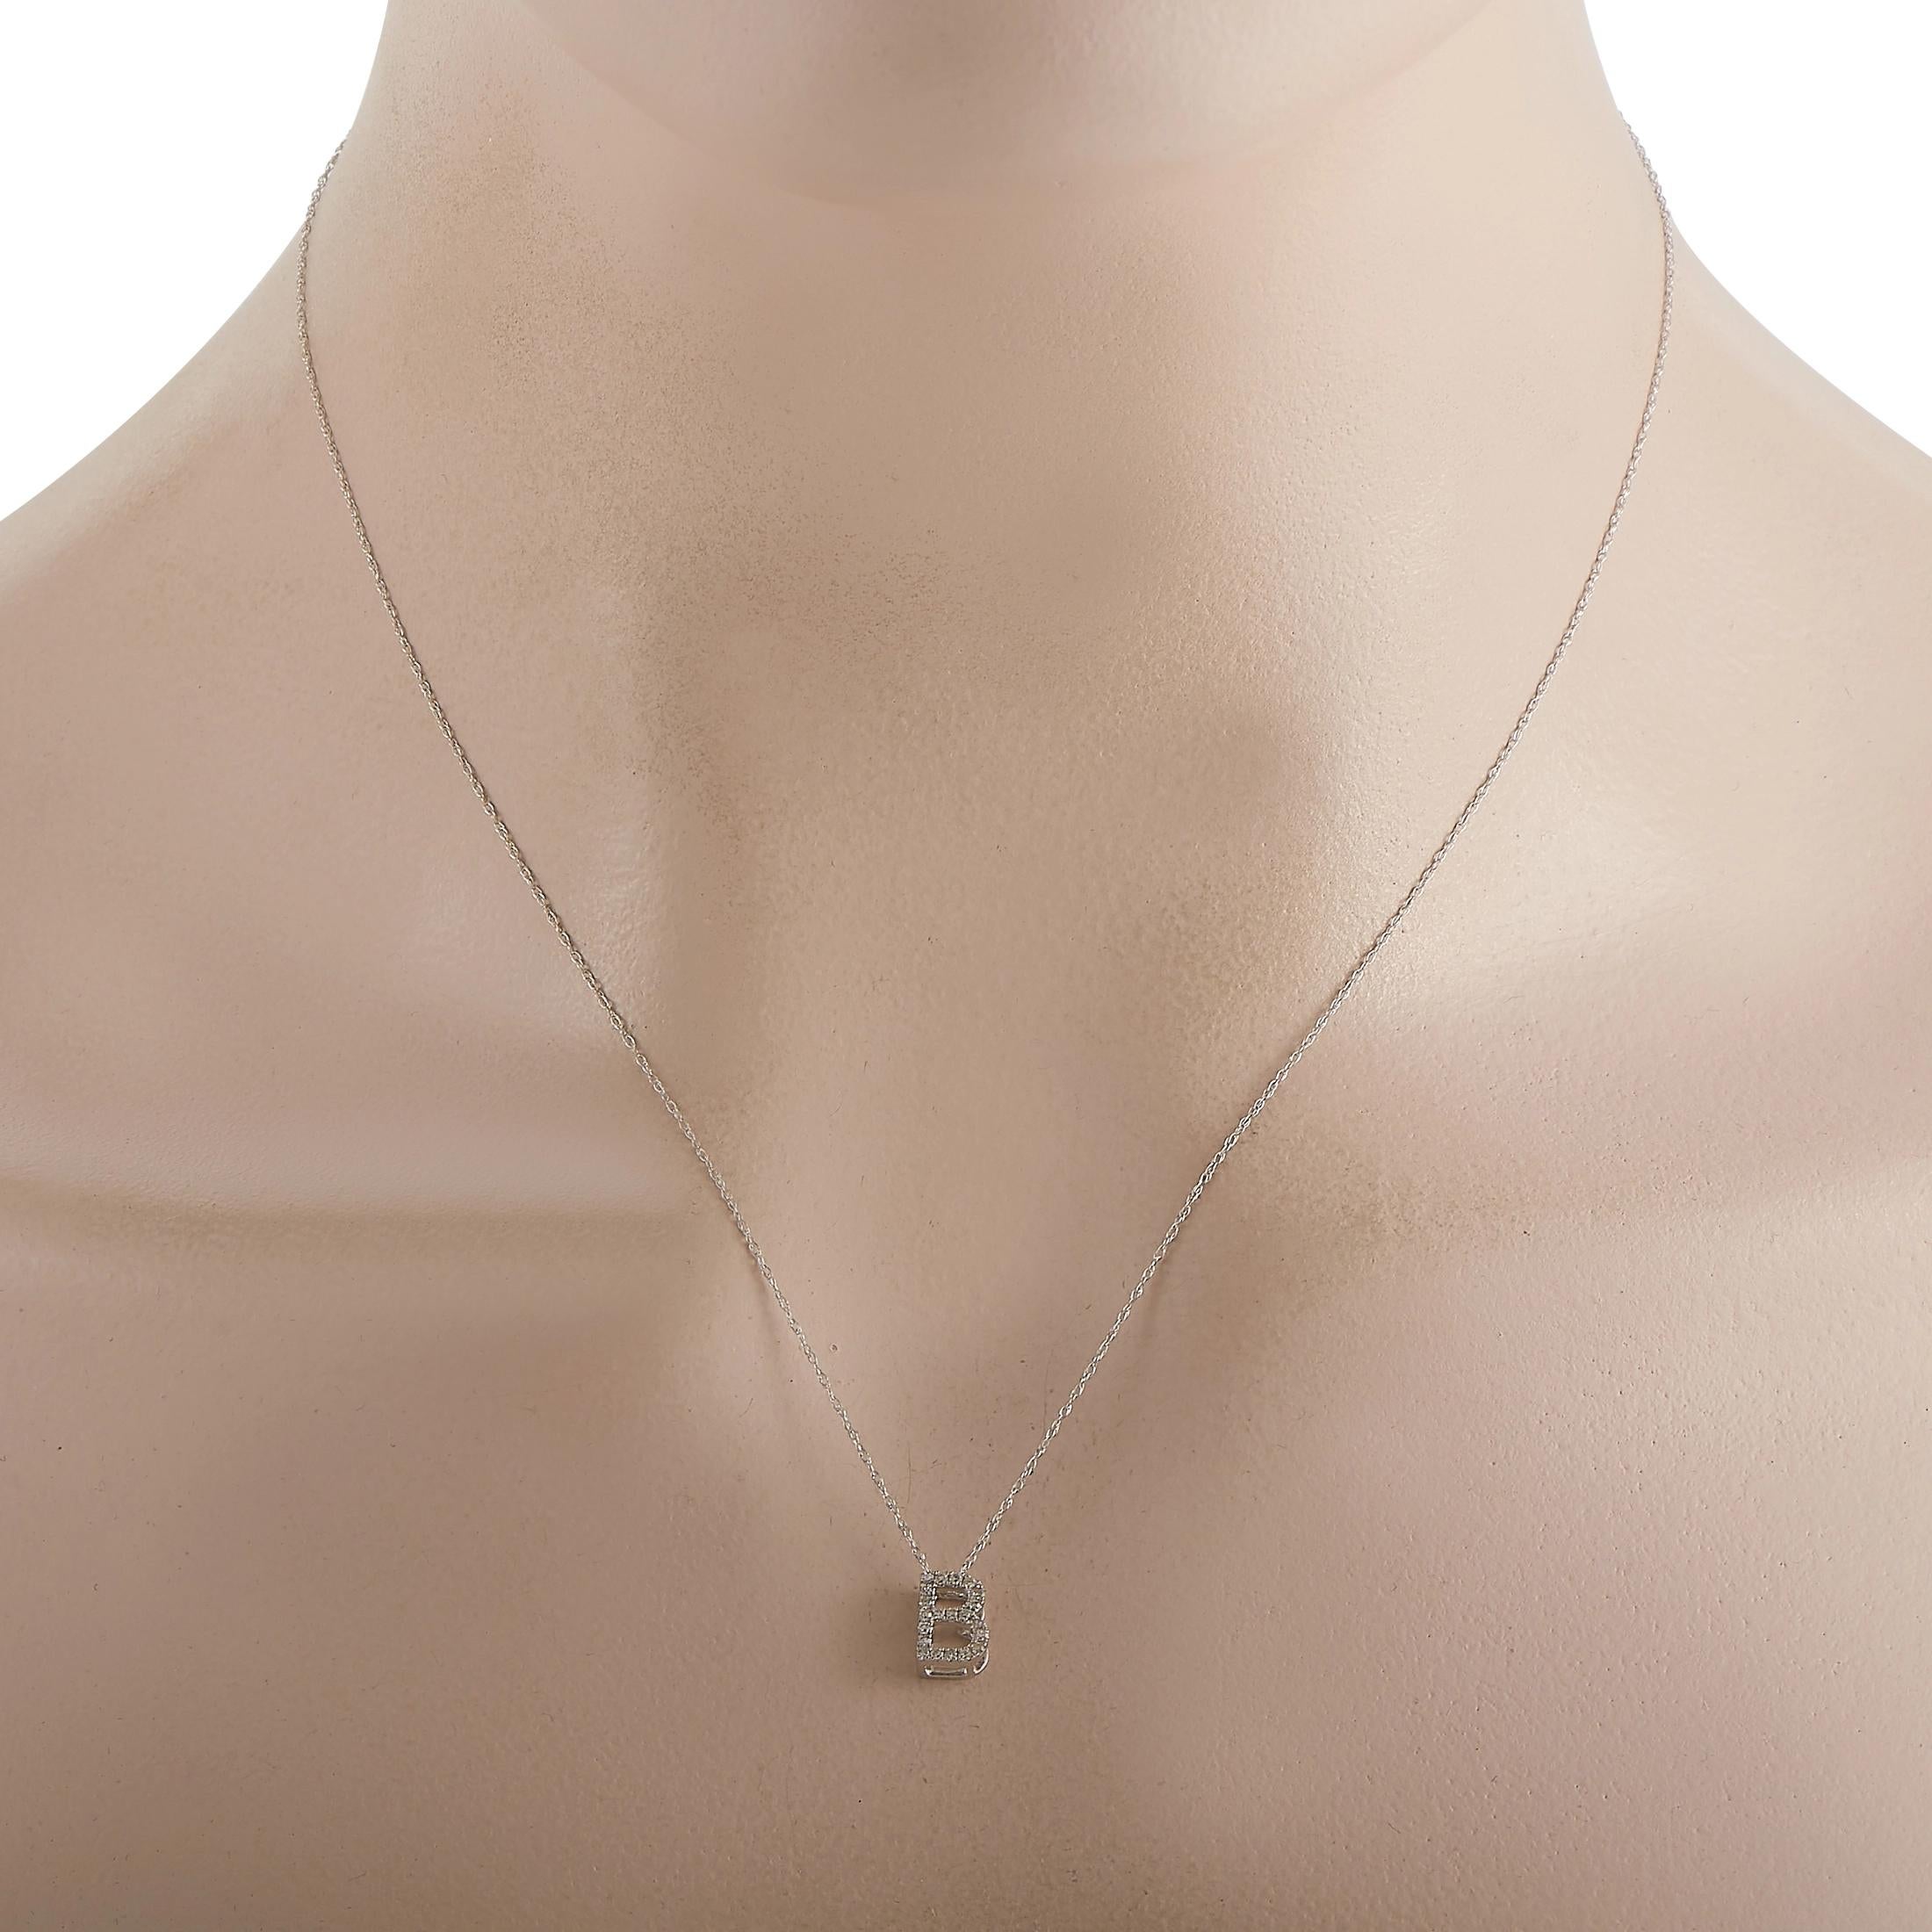 This pretty LB Exclusive 14K White Gold 0.10 ct Diamond Initial ‘B’ Necklace is made with a delicate 14K white gold chain and features a small white gold pendant shaped like the letter ‘B’ that is accompanied by 0.10 carats of pavé set diamonds. The